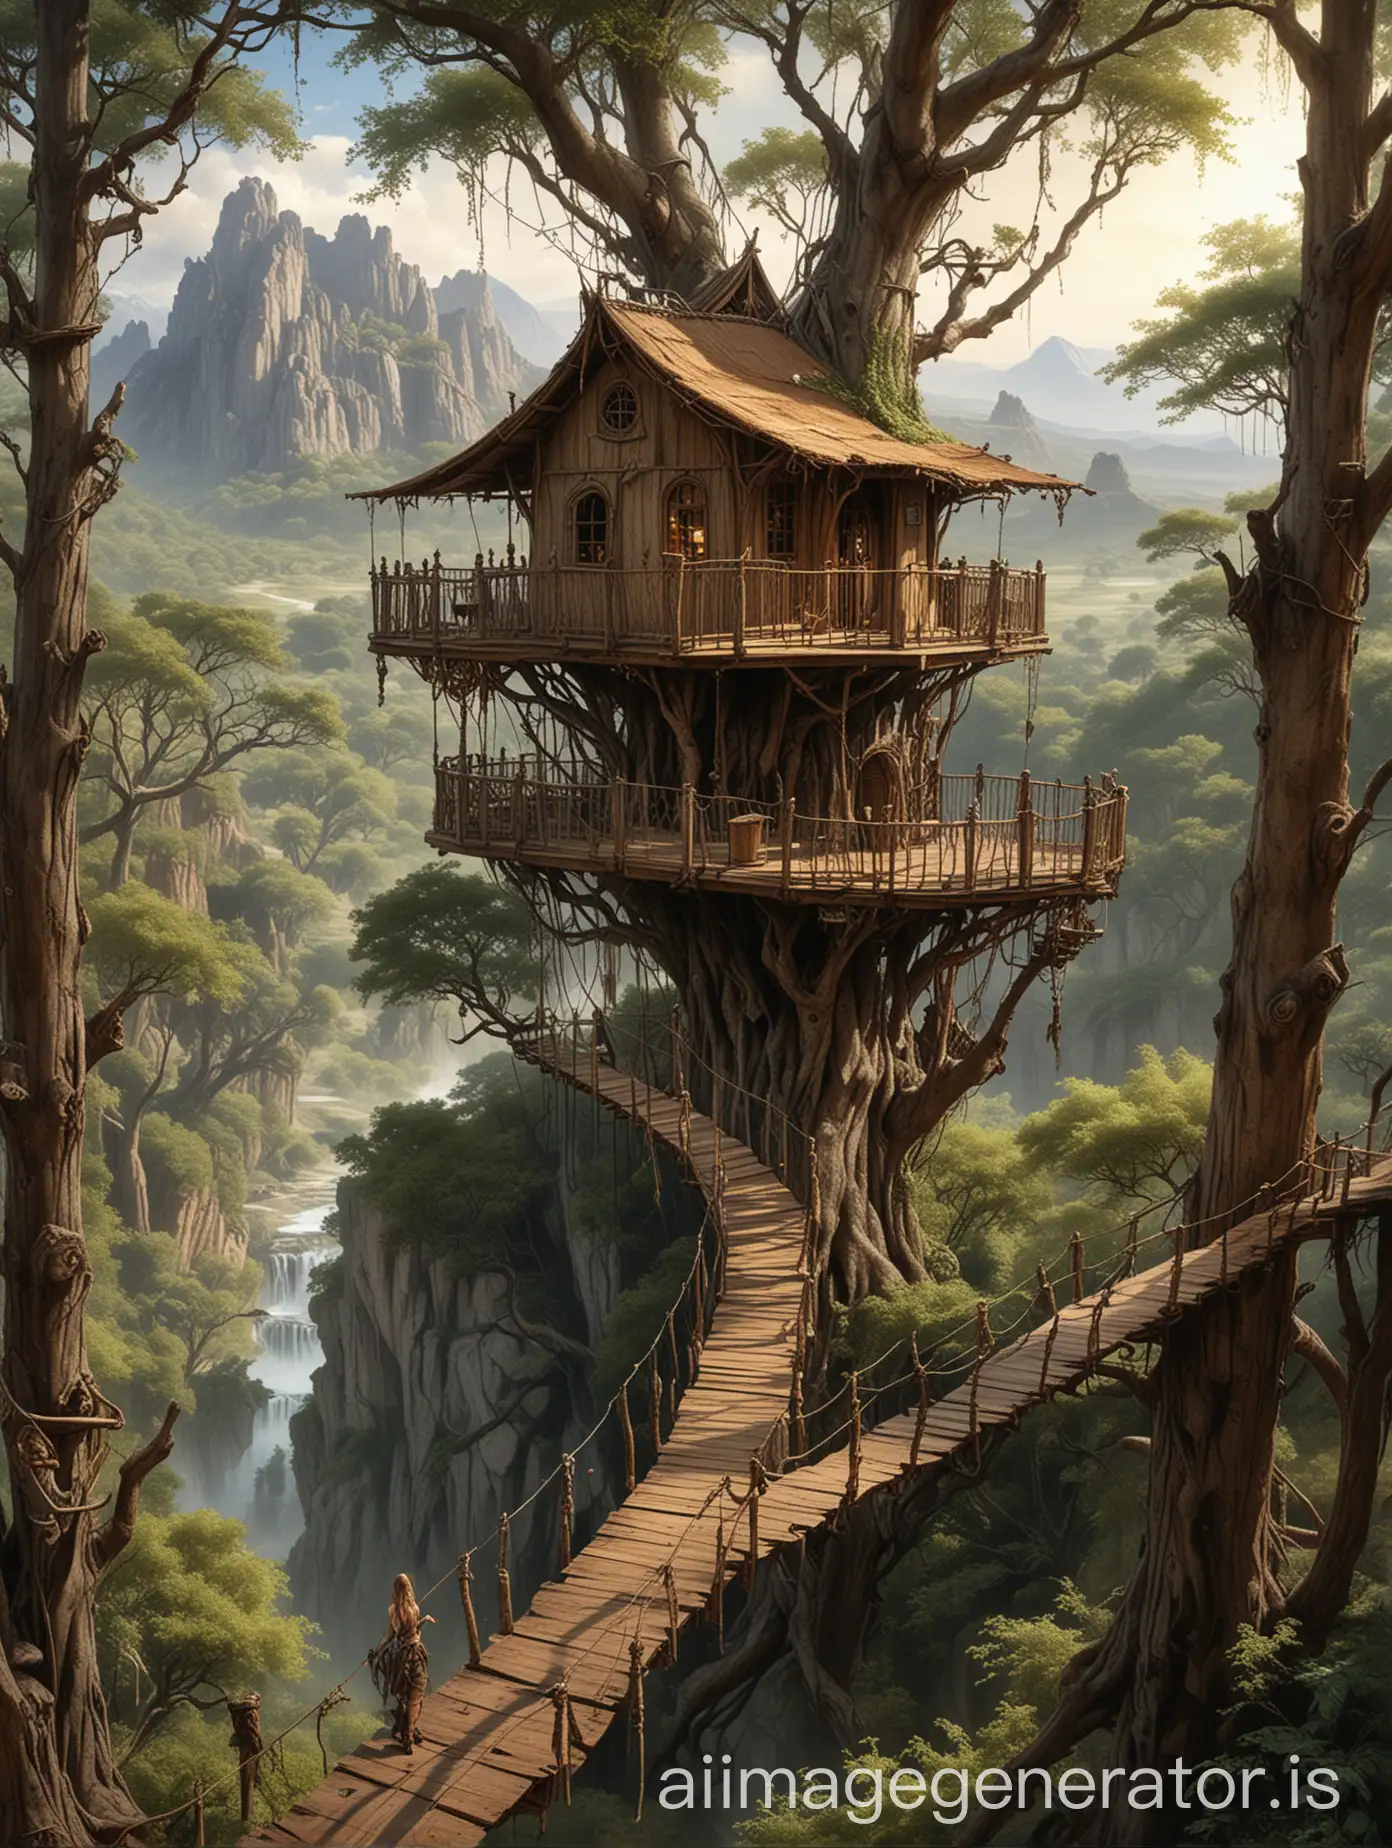 luis royo art style, A unique treehouse retreat built high among the branches, with a rope bridge, wooden walkways, and a view of the mountain range stretching out into the distance